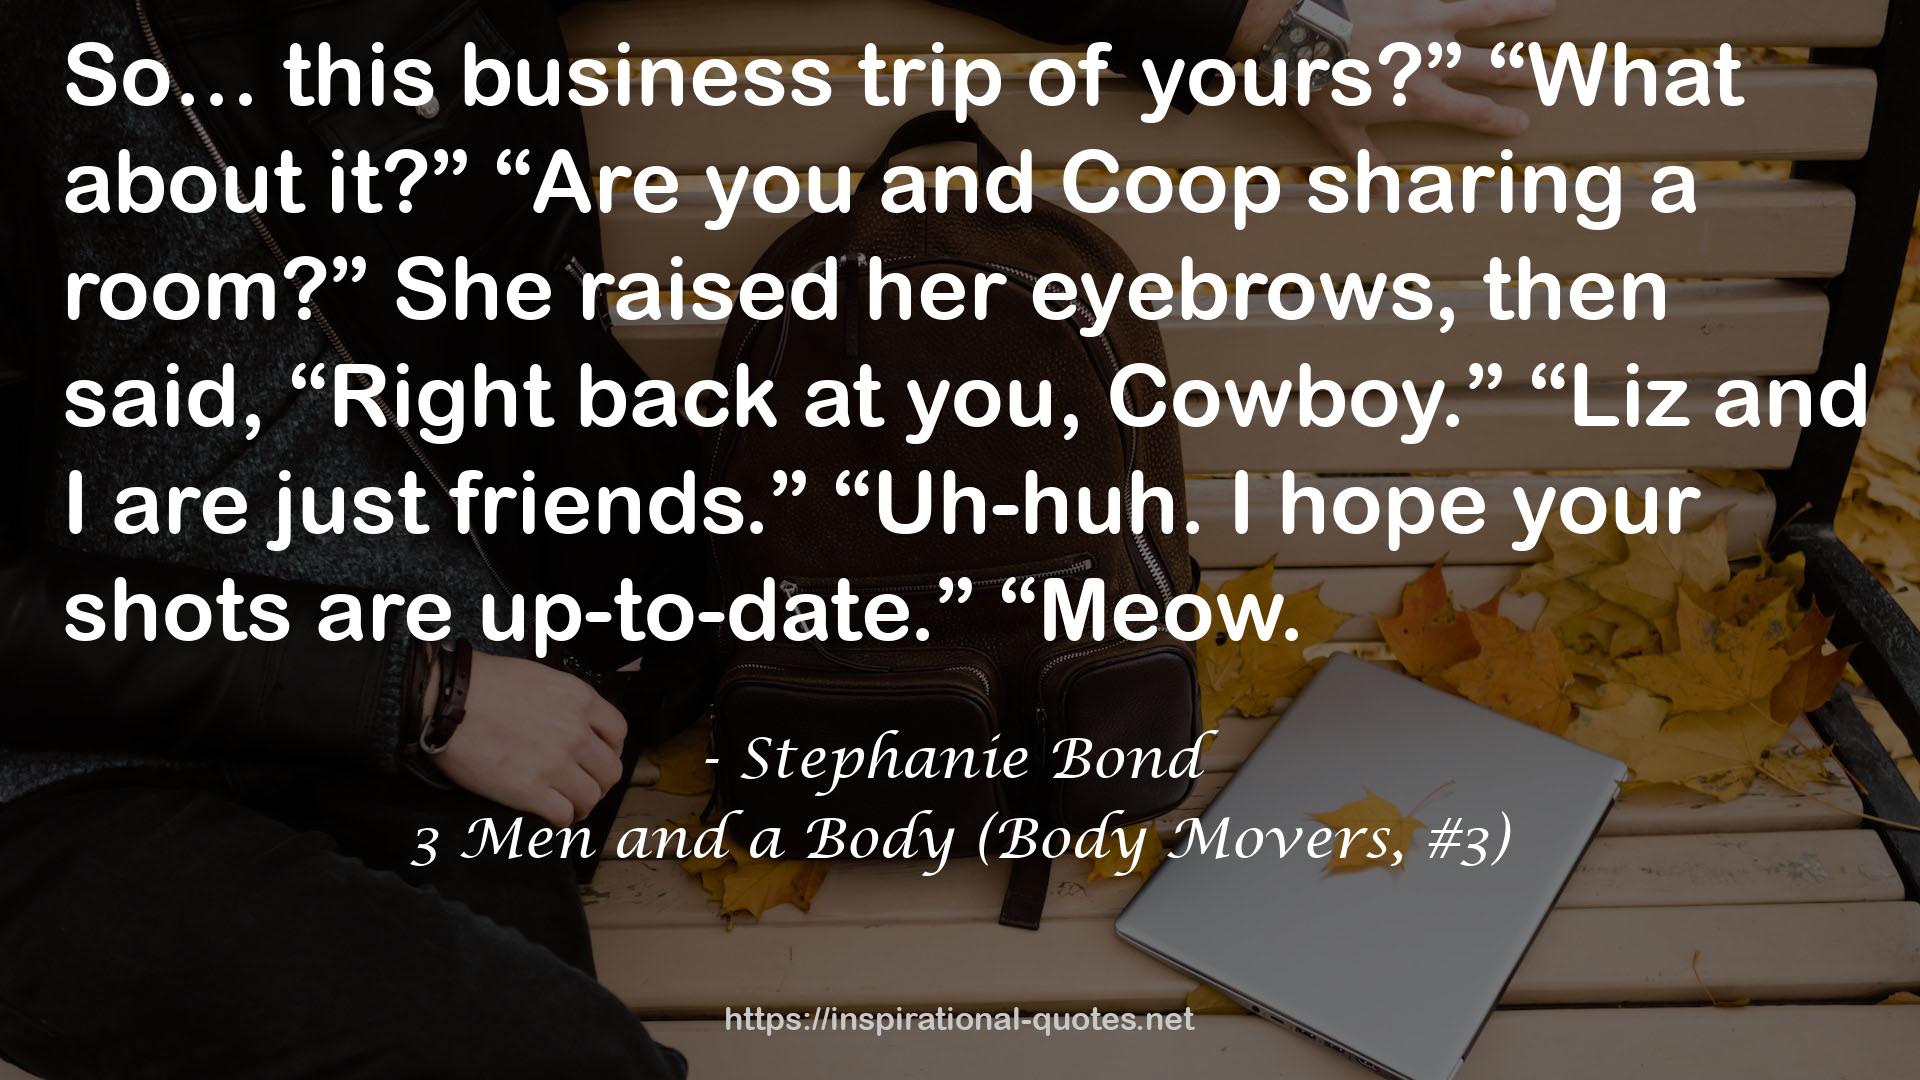 3 Men and a Body (Body Movers, #3) QUOTES